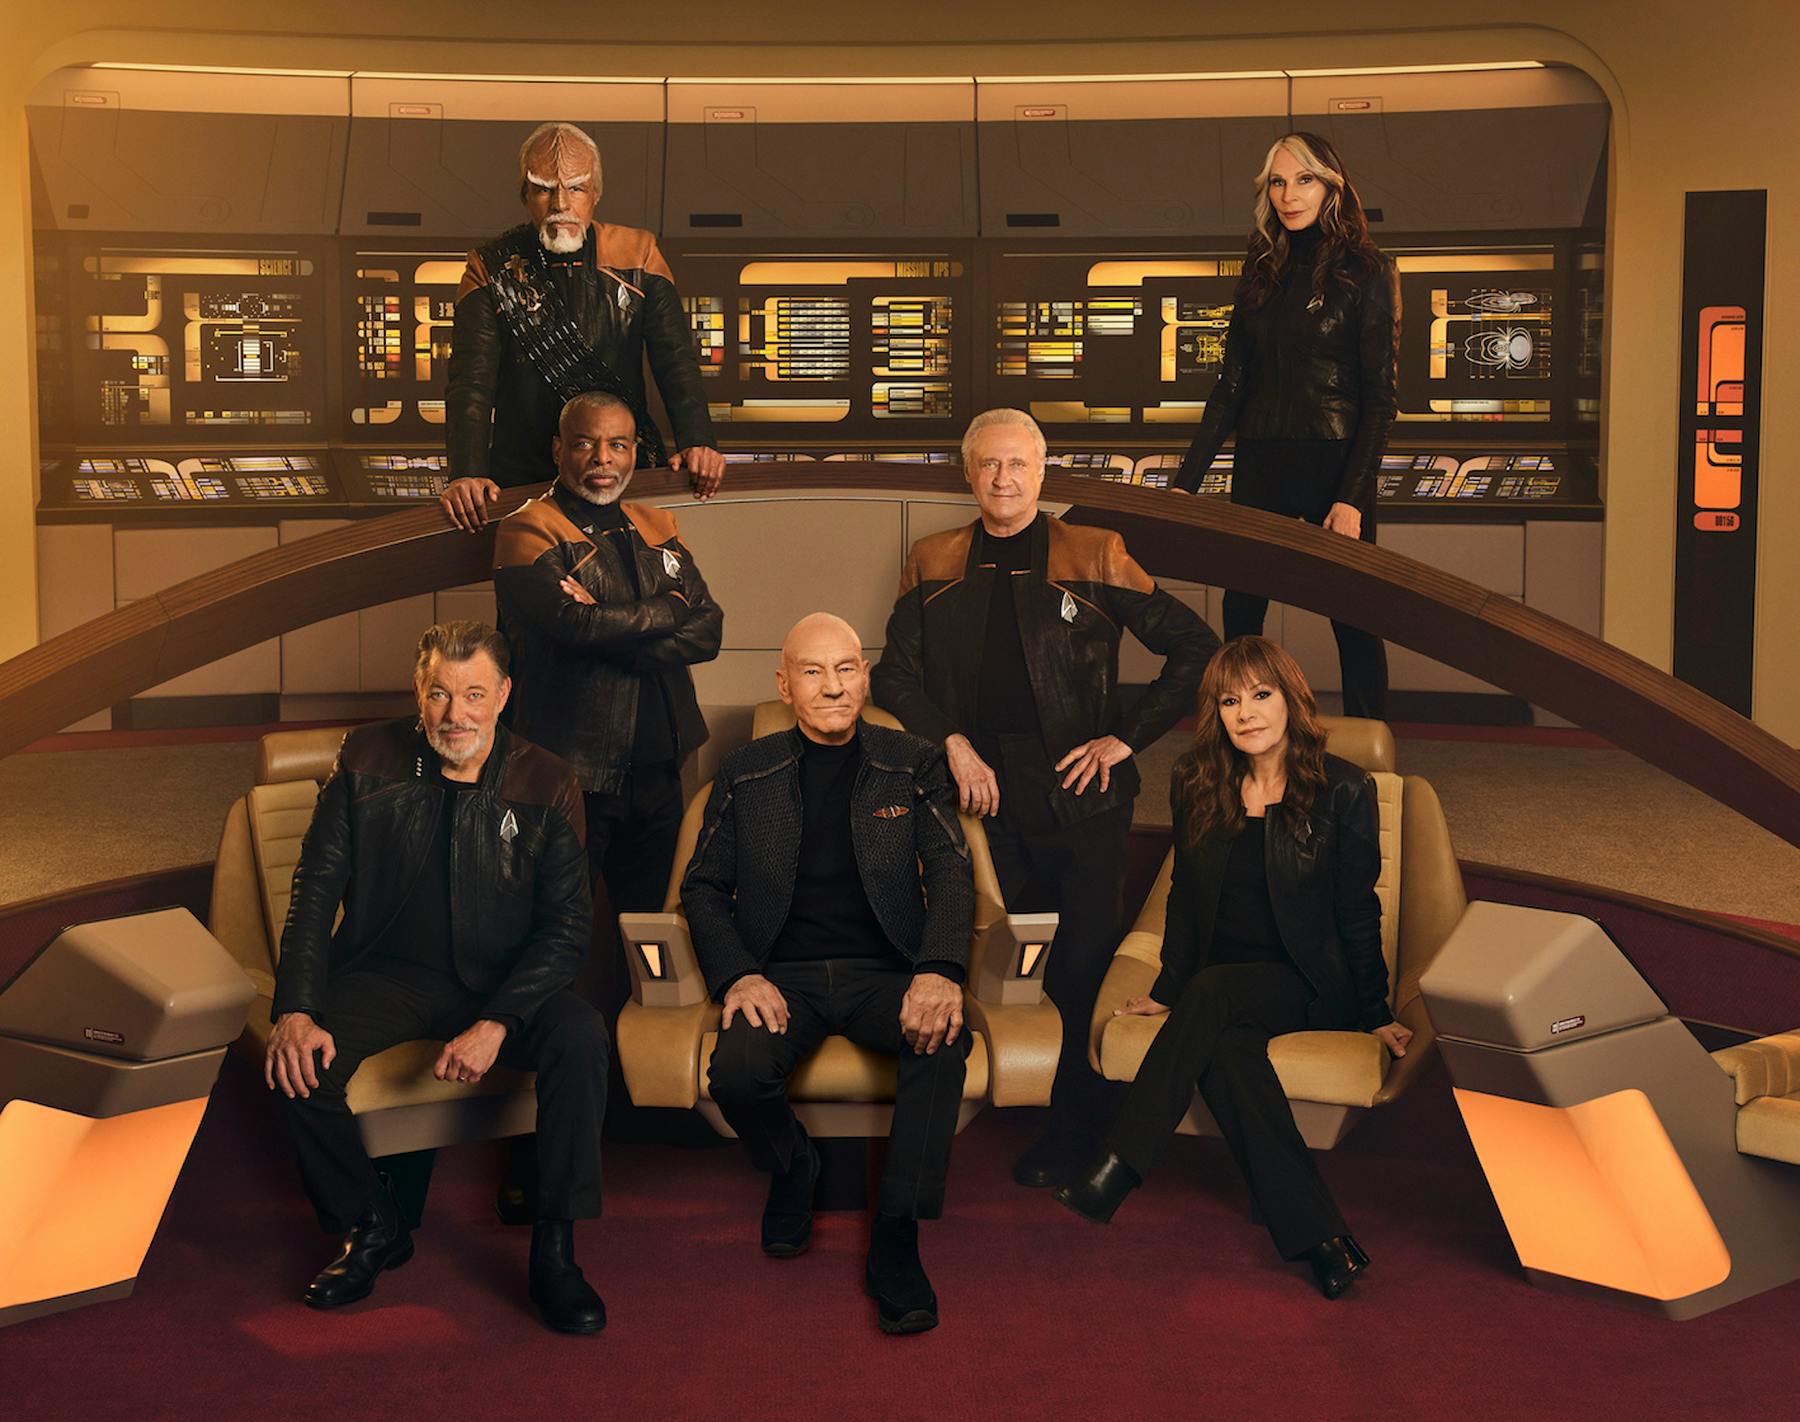 The TNG crew on the bridge of the reconstructed Enterprise-D (Worf, Beverly Crusher, Geordi La Forge, Data, Will Riker, Jean-Luc Picard, and Deanna Troi)